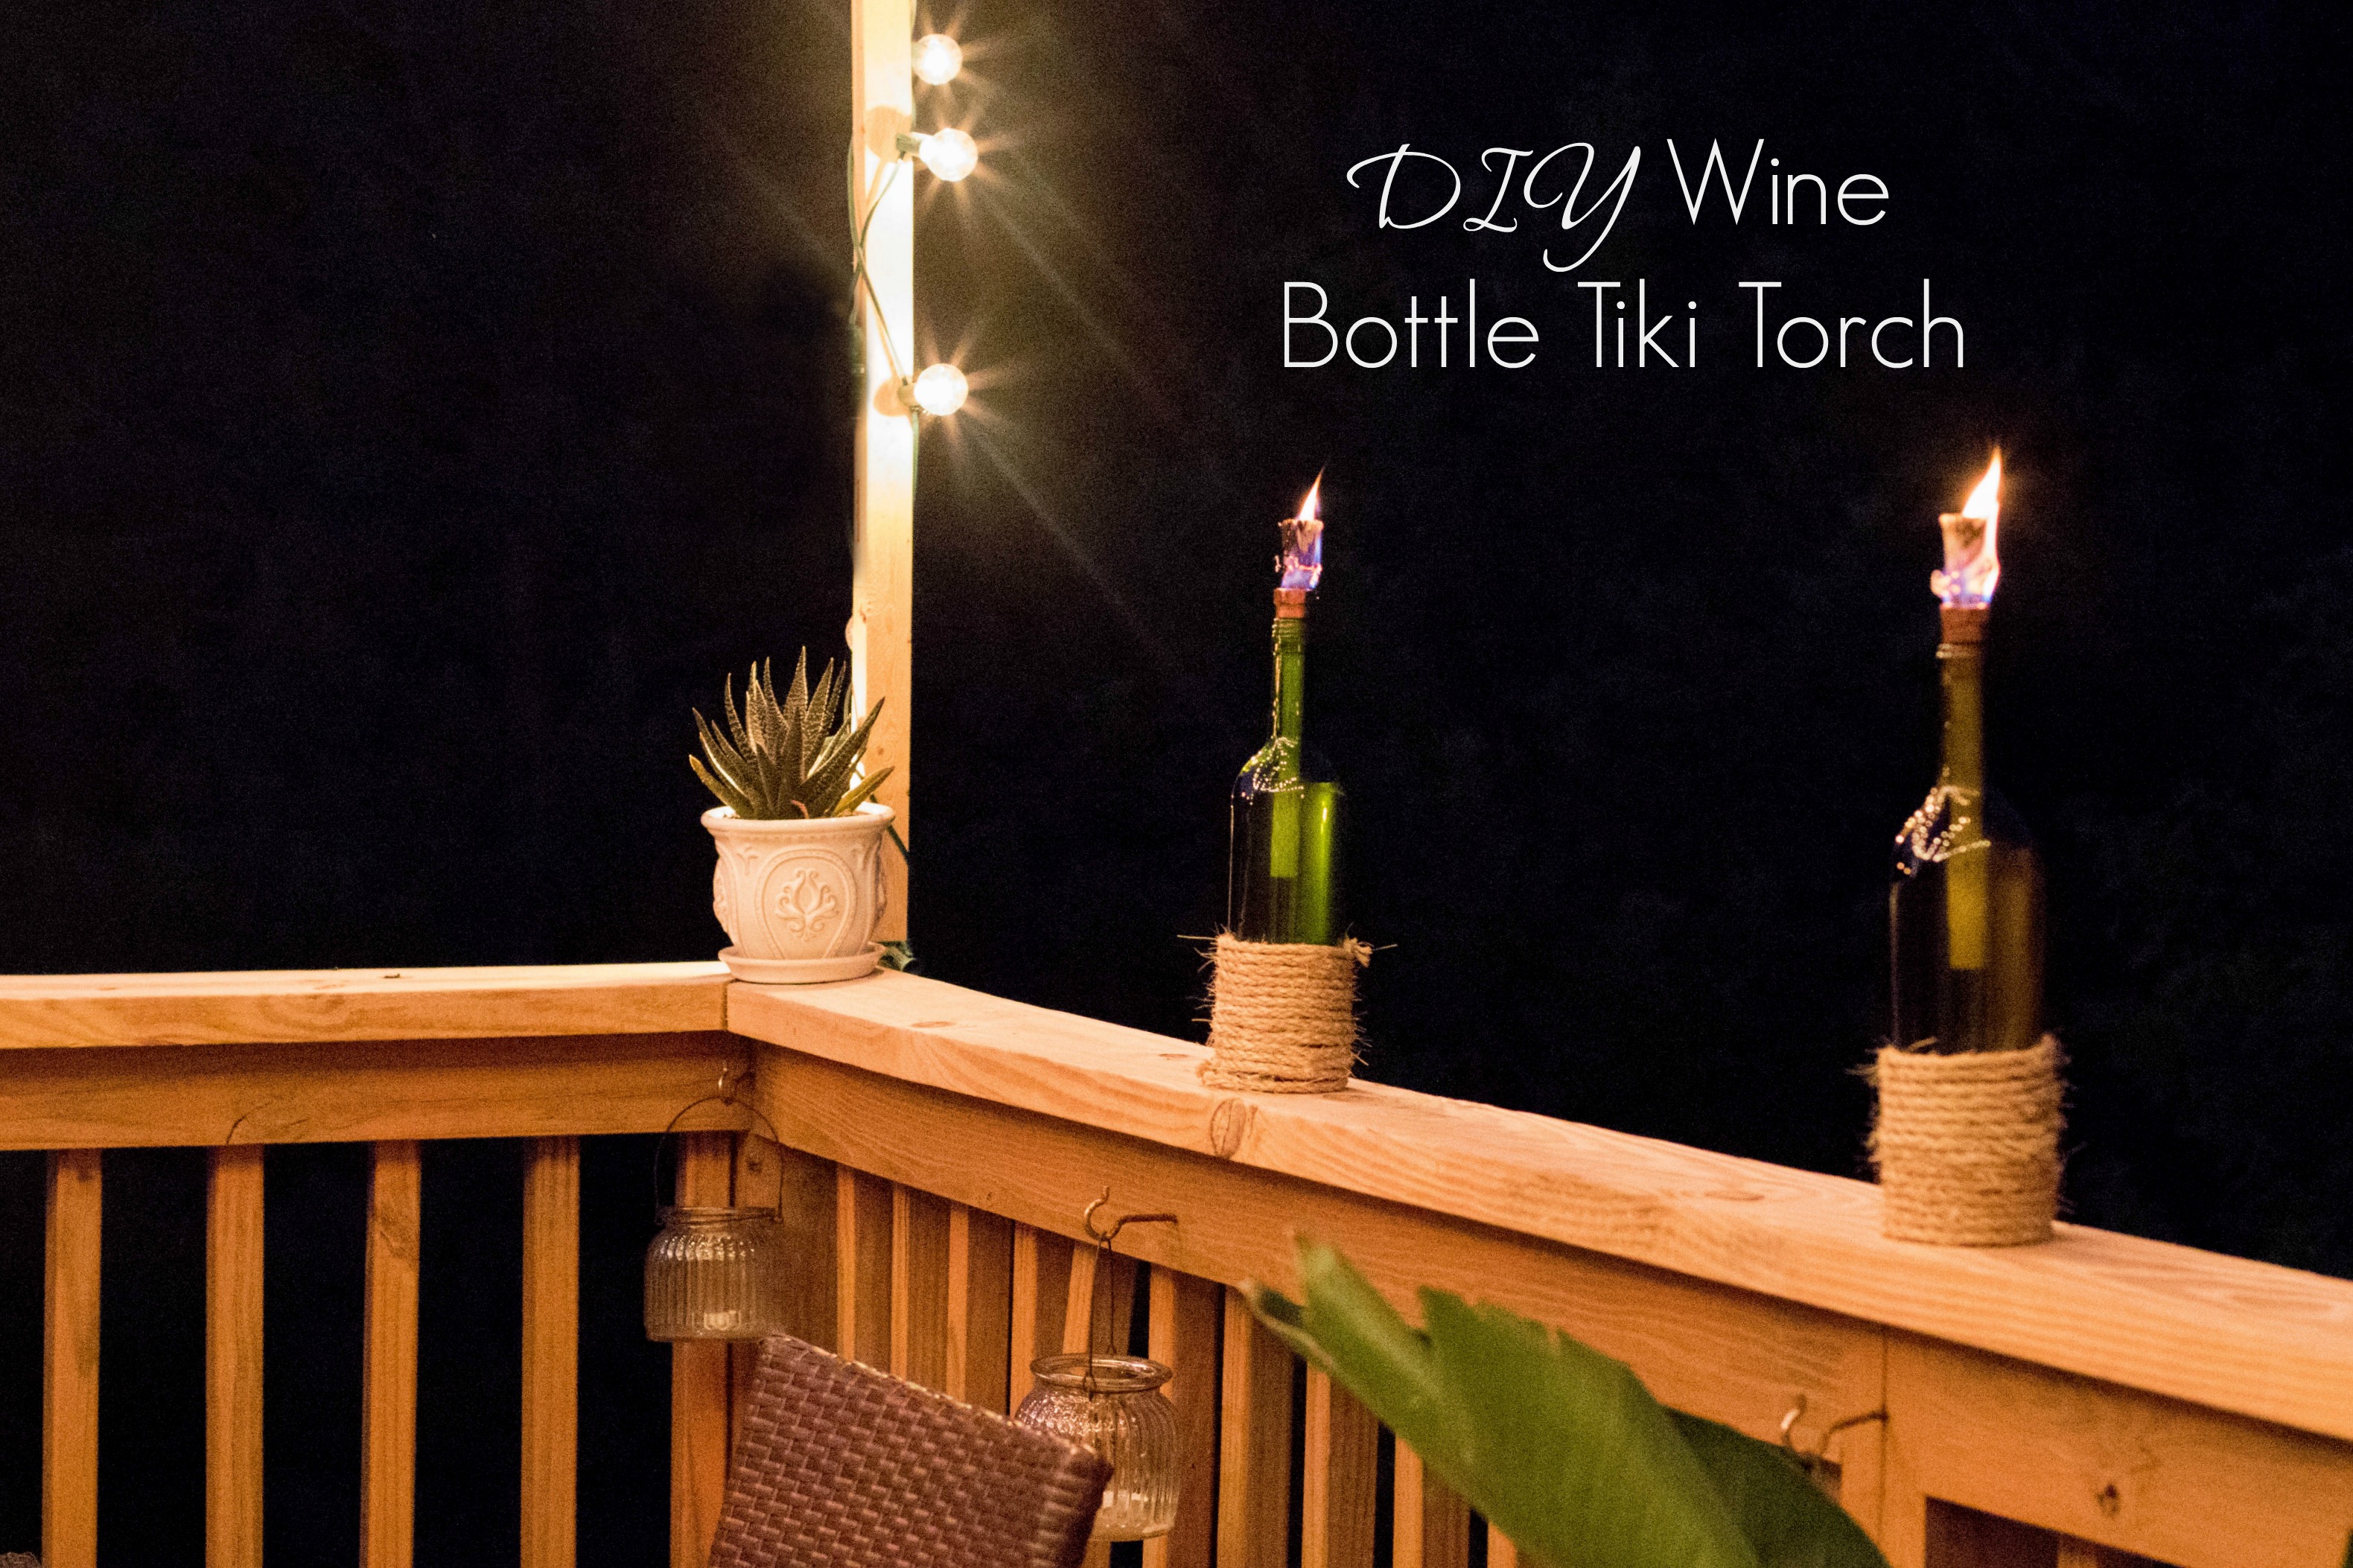 DIY Wine Bottle Tiki Torch by coffee blogger Amy of Coffee Beans and Bobby Pins